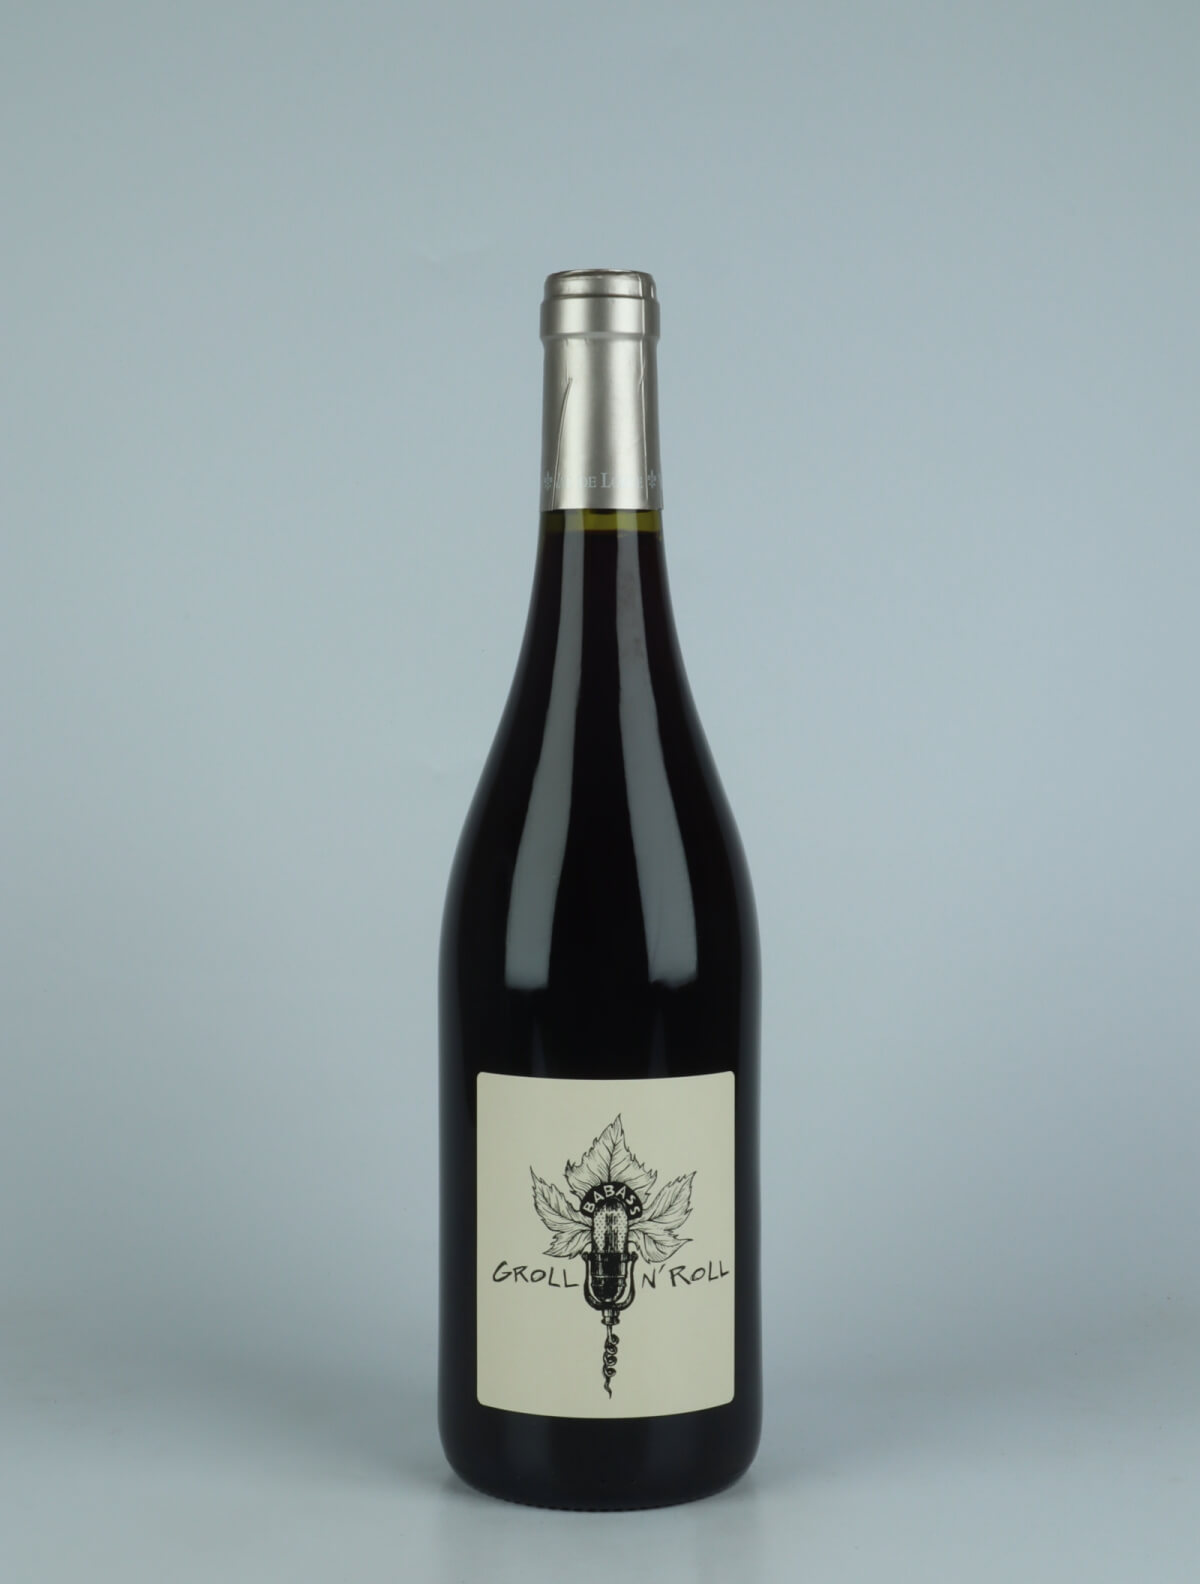 A bottle 2022 Groll 'n Roll Red wine from Les Vignes de Babass, Loire in France